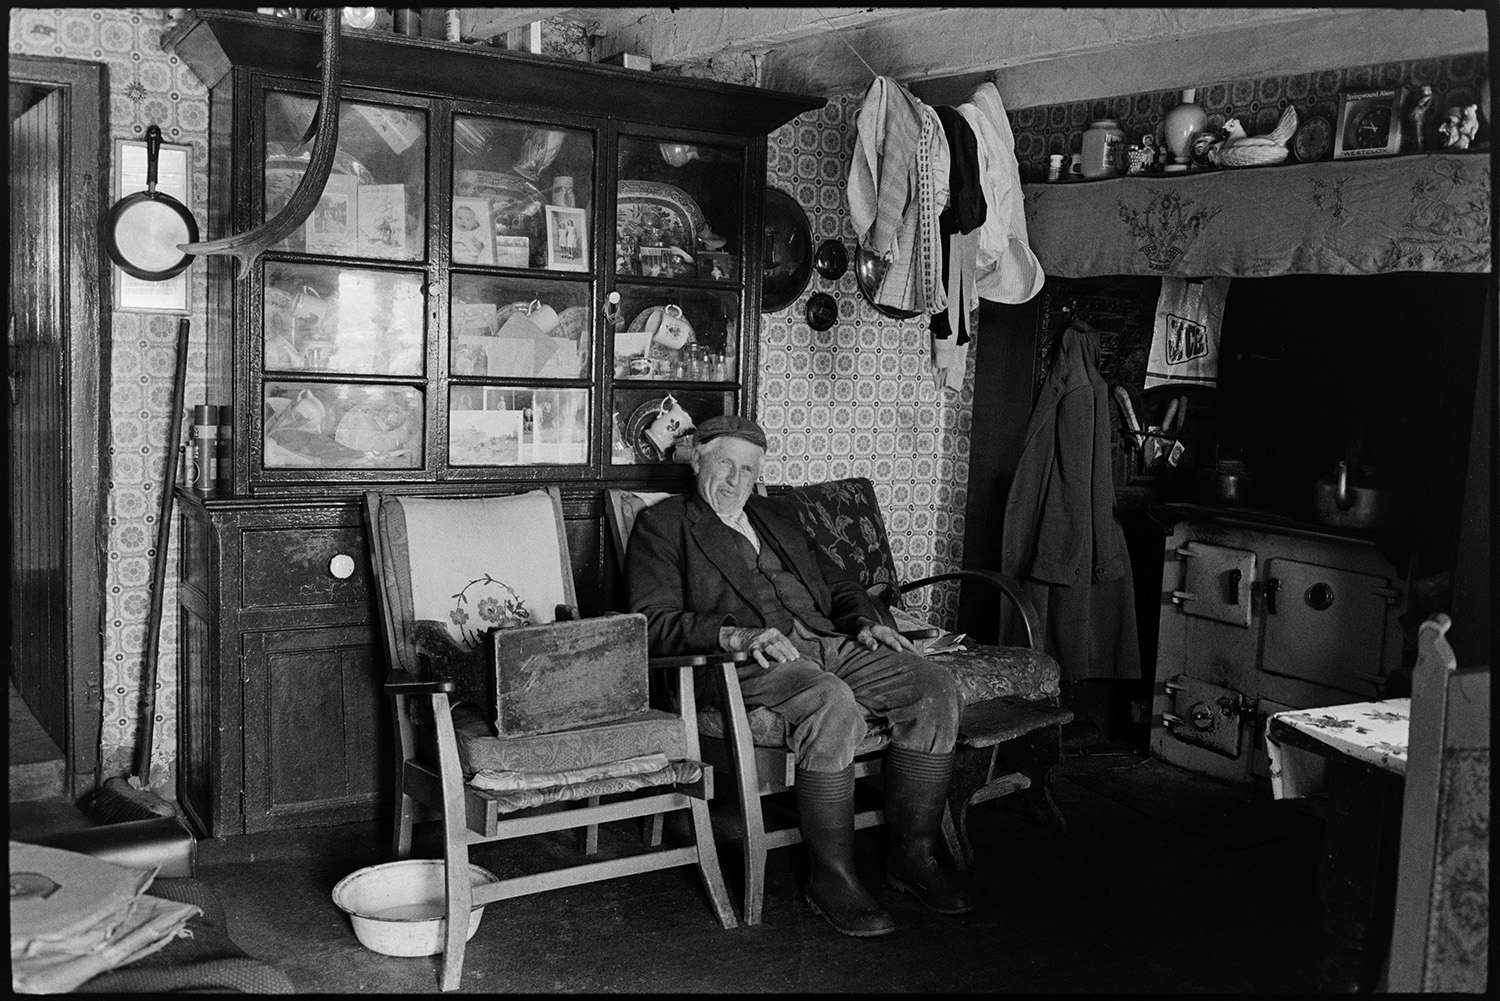 Farm interior, man seated with dresser, furniture. Now modernised.
[Wilfie Spiers sitting near the Rayburn at Mount Pleasant, Beamsworthy. A dresser, ornaments on the mantelpiece and coats and washing hanging up to dry are visible in the room. The walls are covered with patterned wallpaper.]